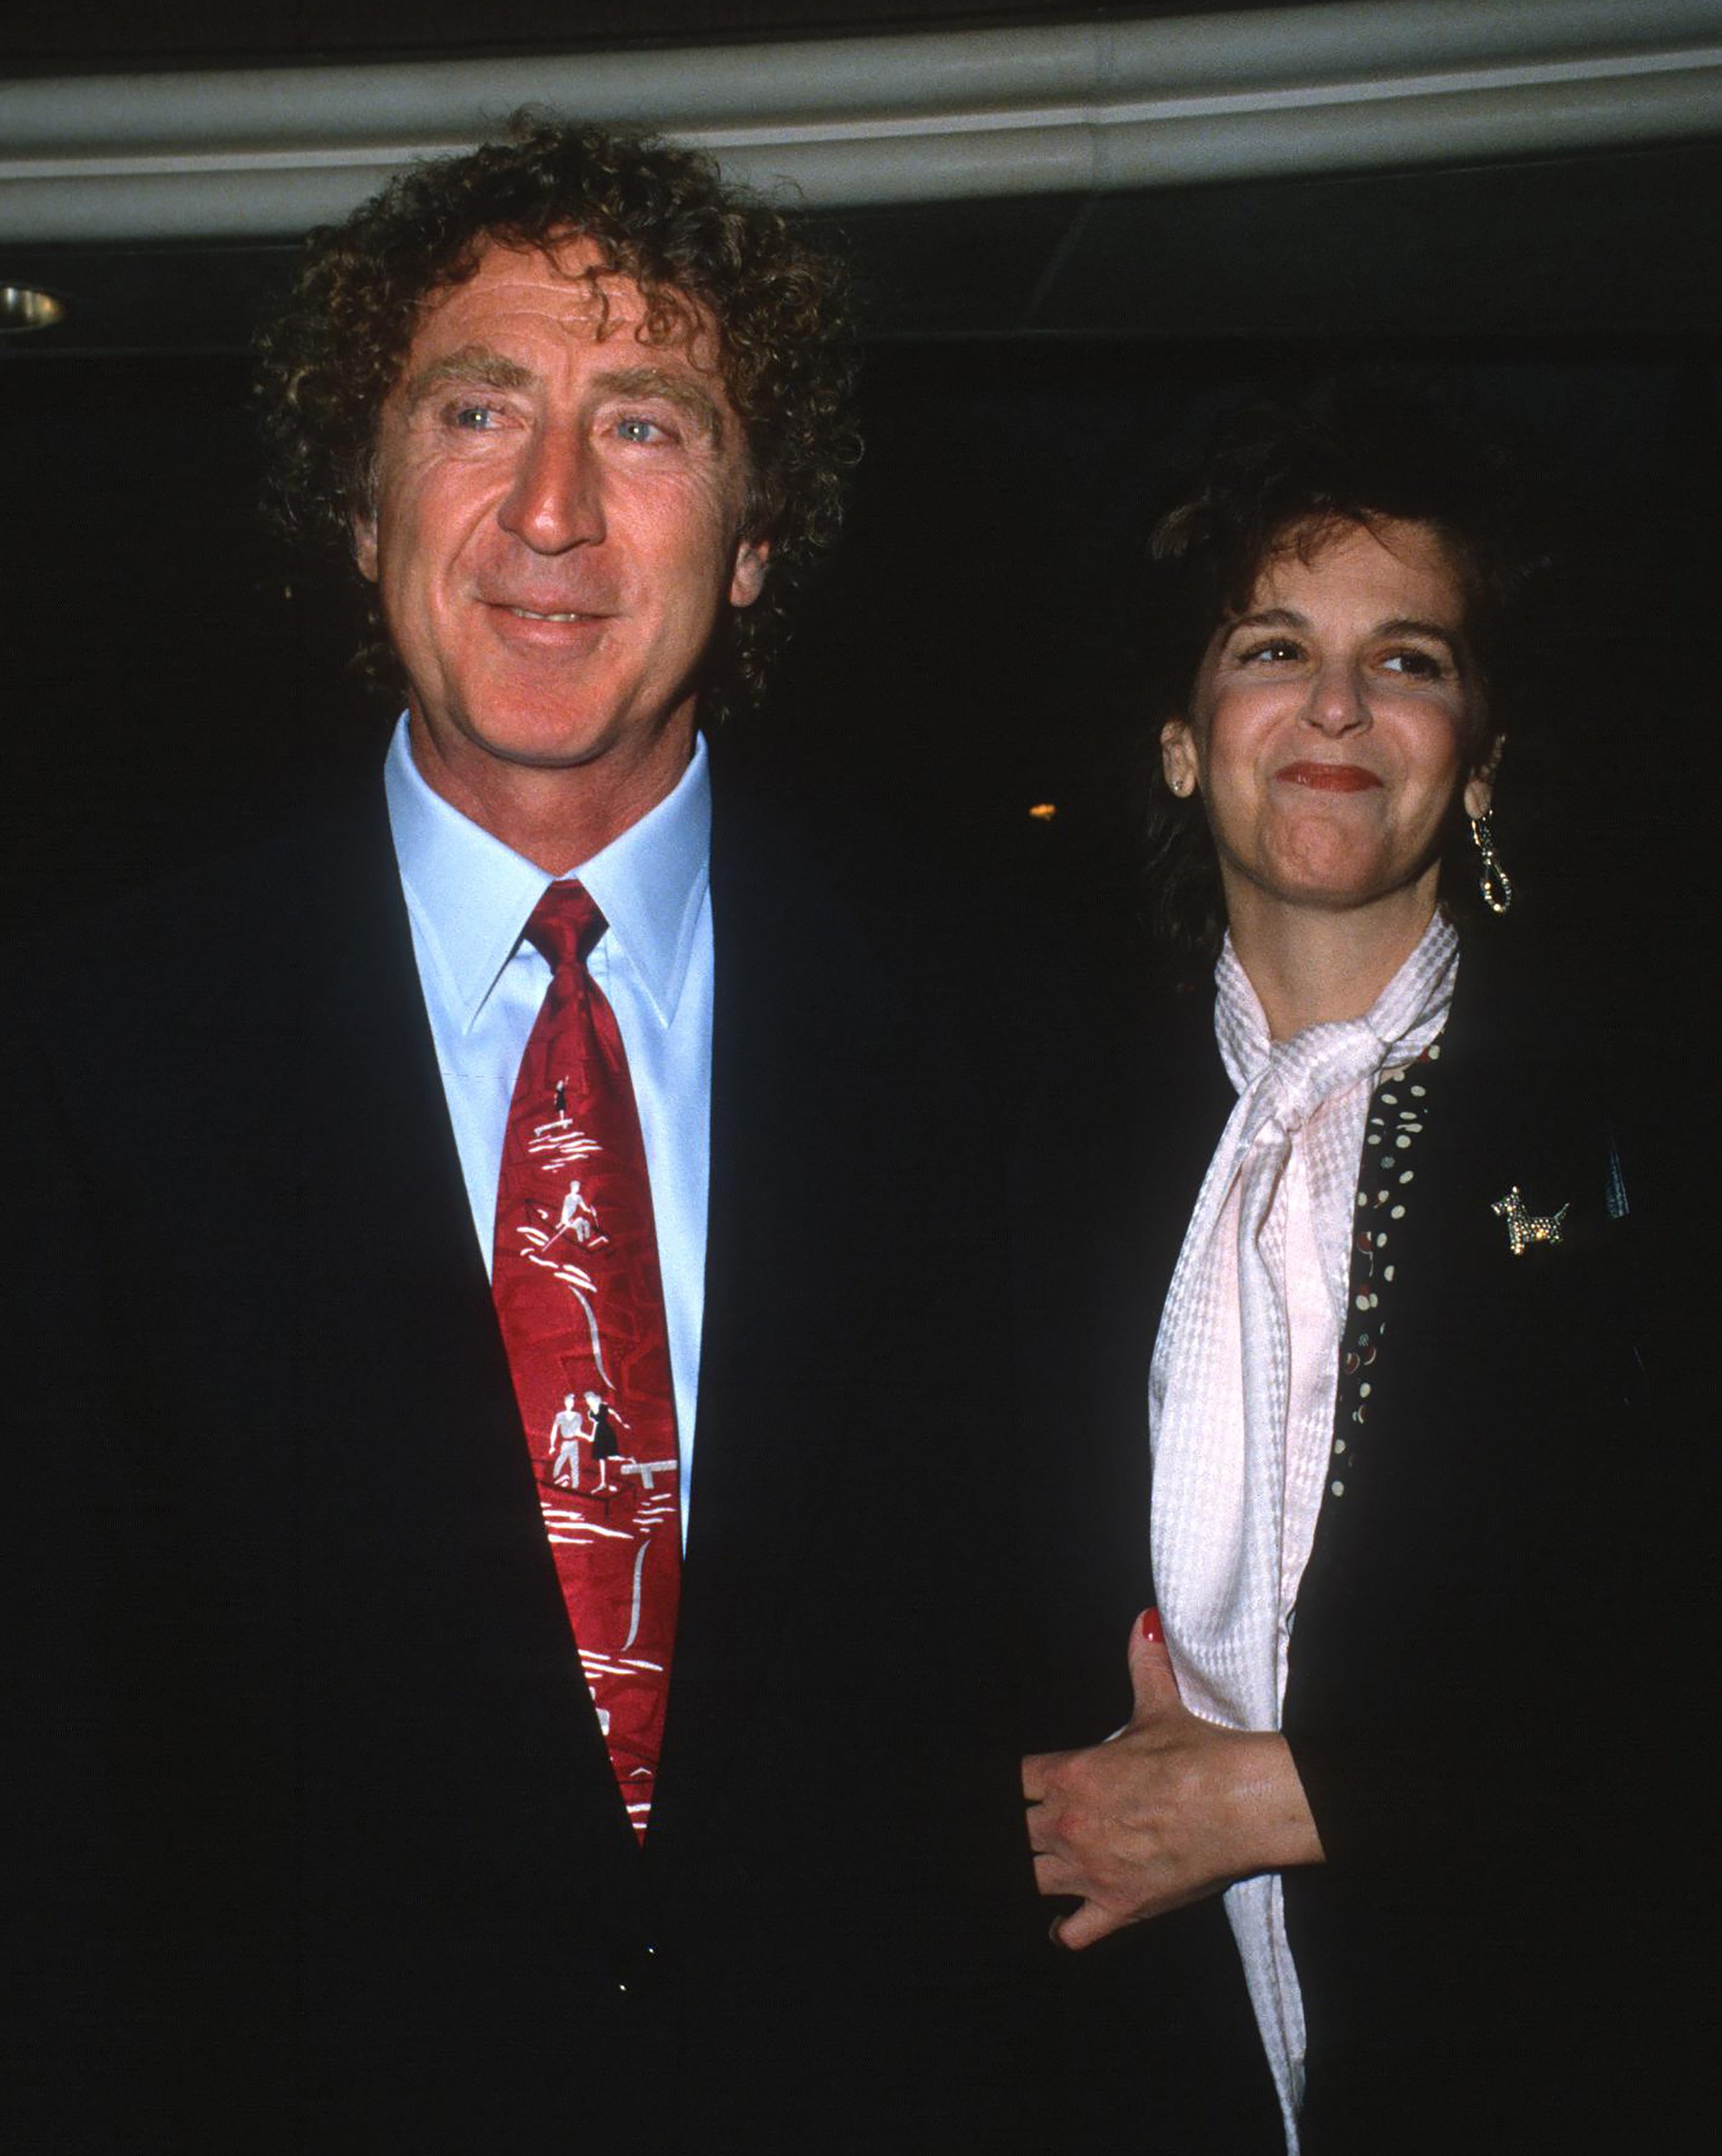 Gene Wilder and Gilda Radner attend a Wellness Center benefit on January 30, 1989, at Century City, California. | Source: Getty Images